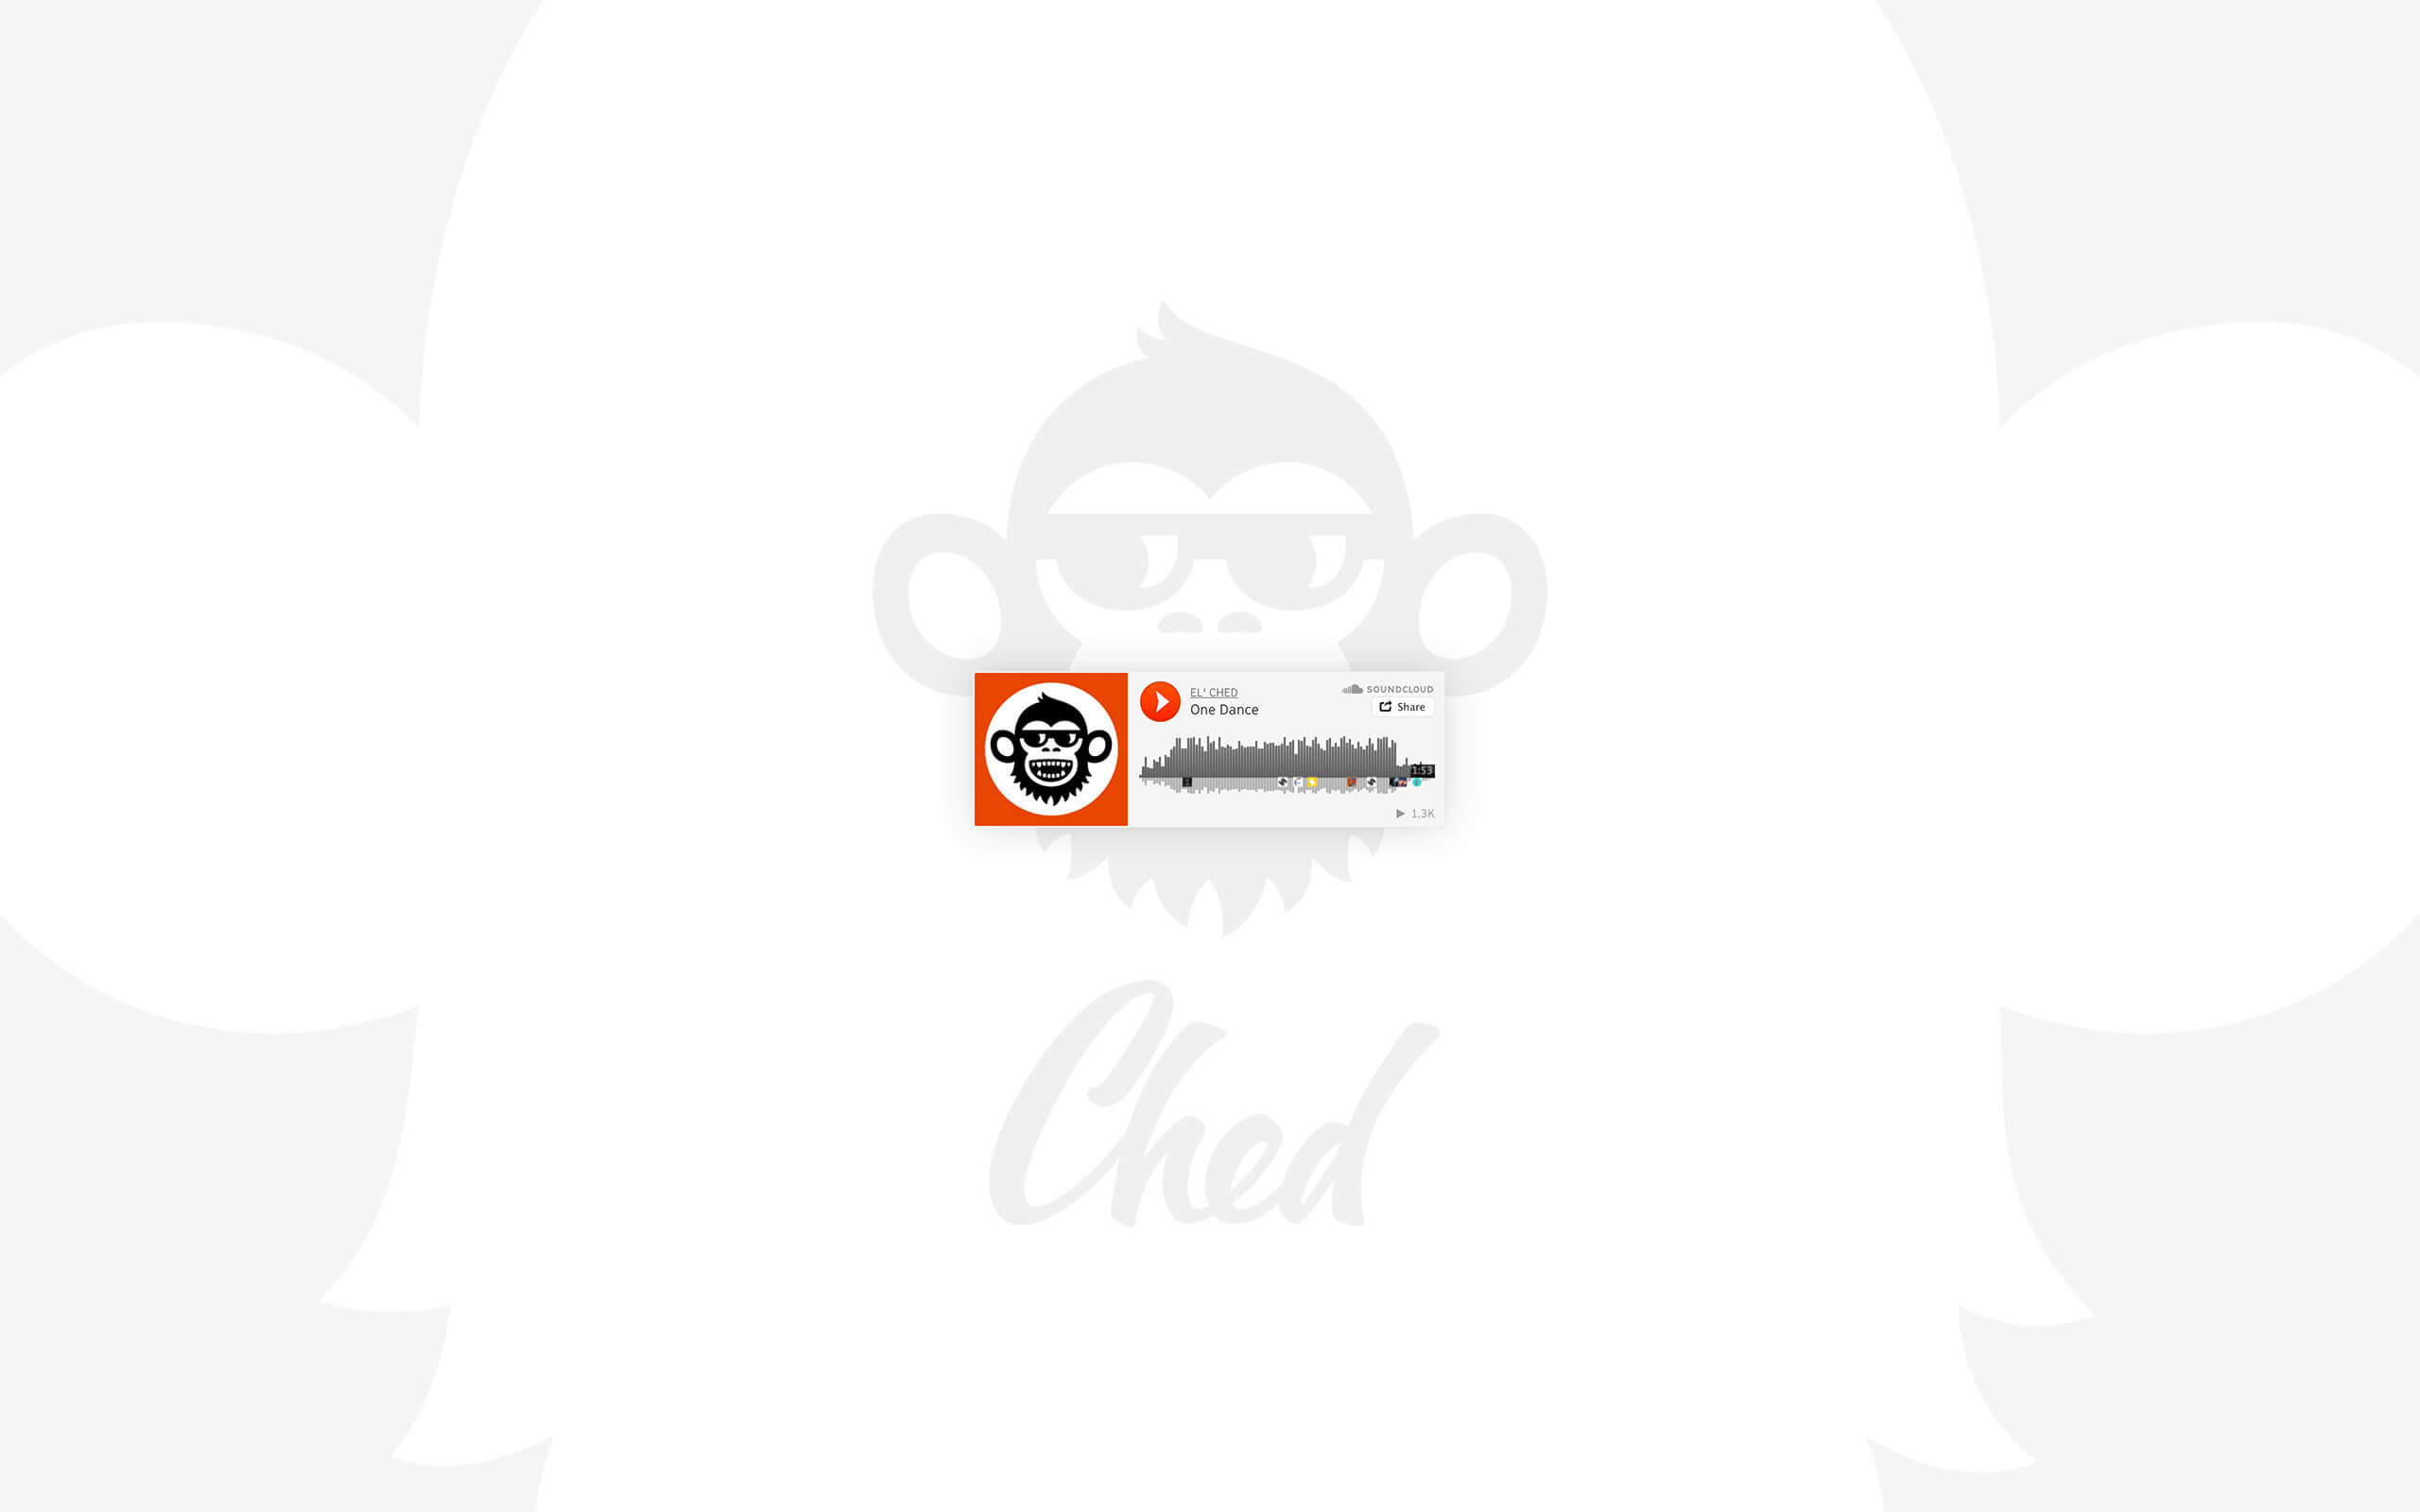 Ched Logo - El Ched logo